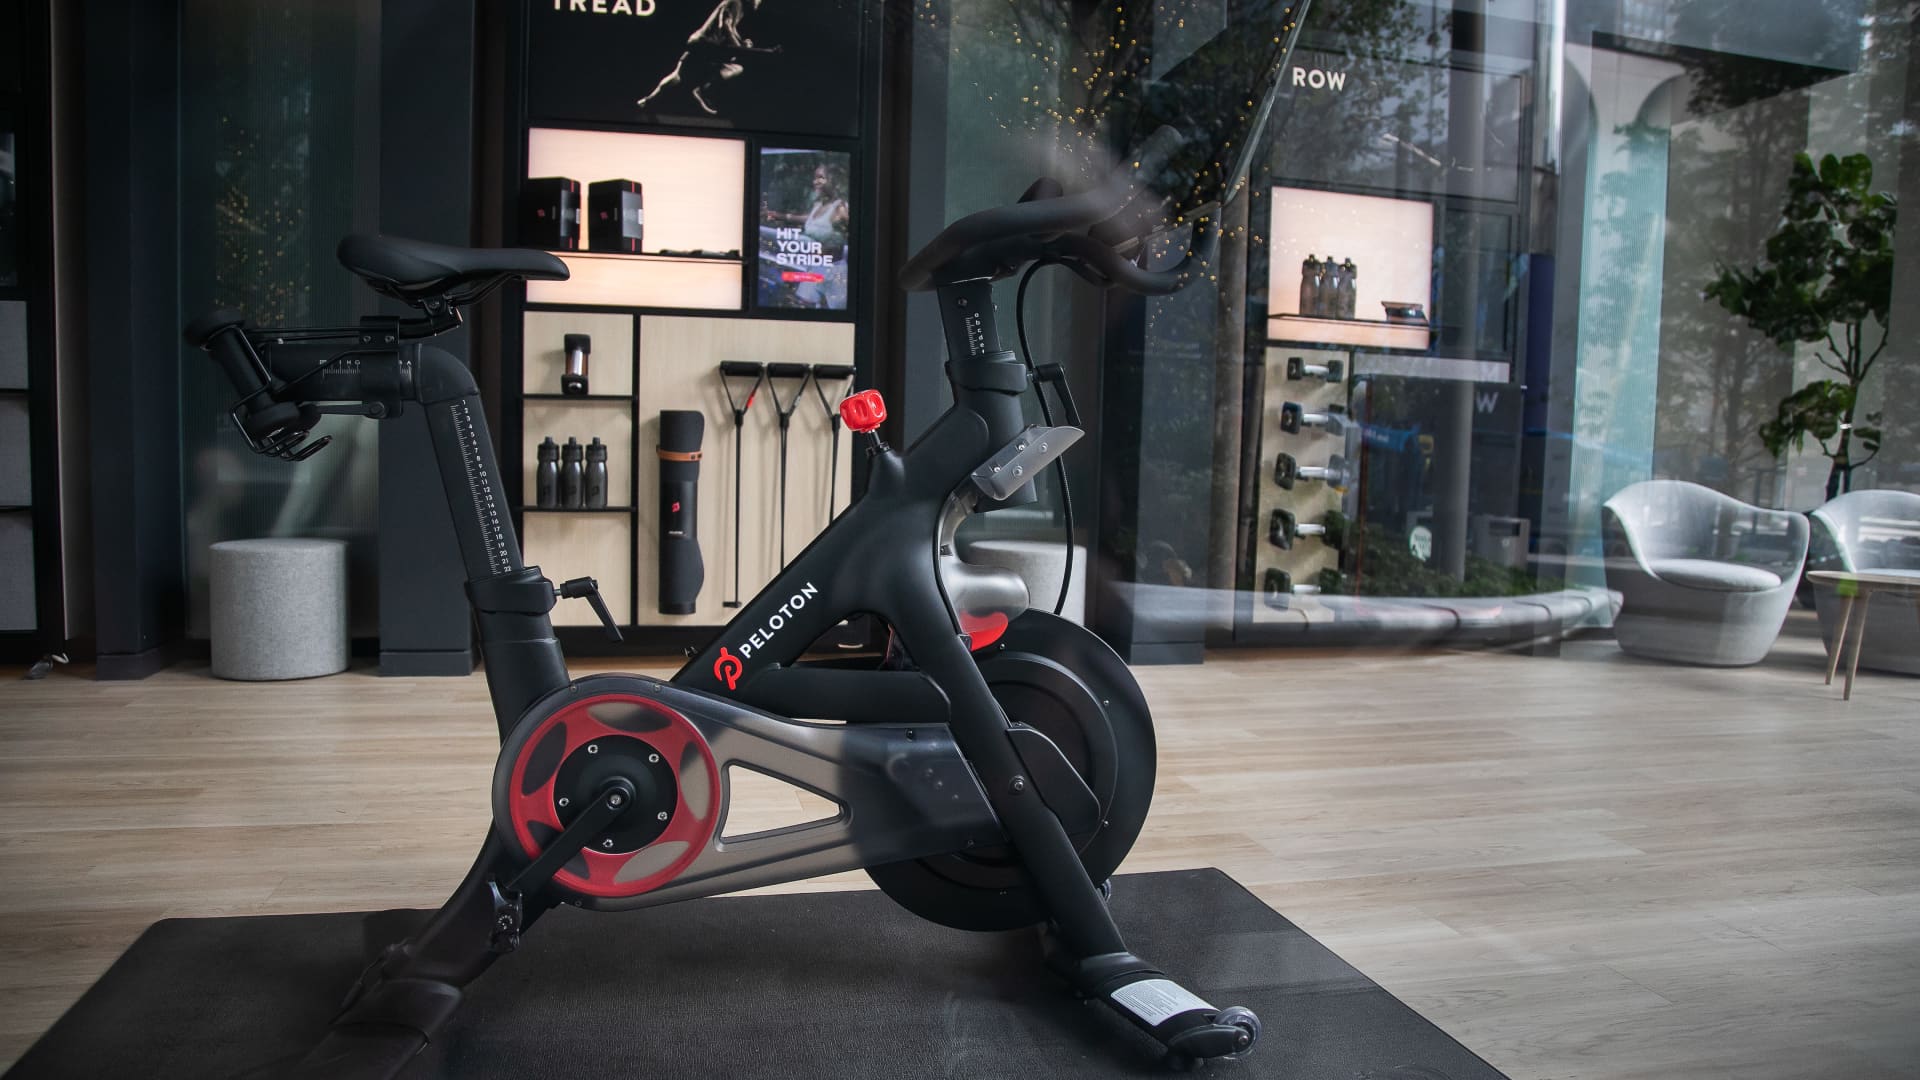 Here's how much money you'd have lost if you invested $1,000 in Peloton when it went public - CNBC